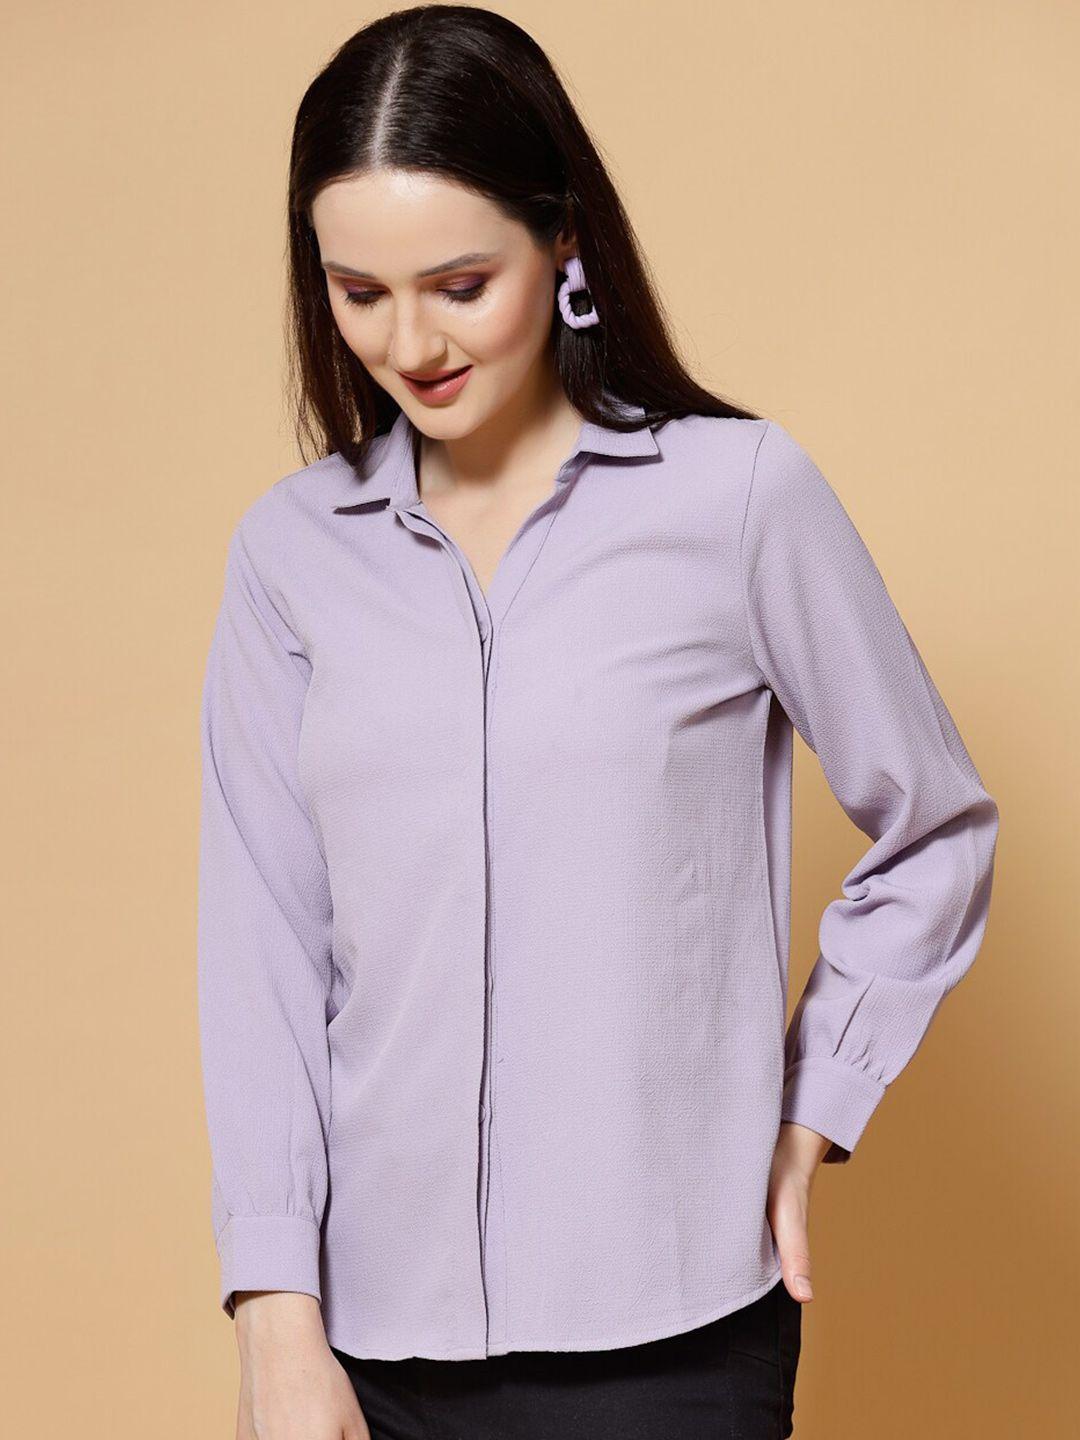 strong and brave women purple opaque casual shirt